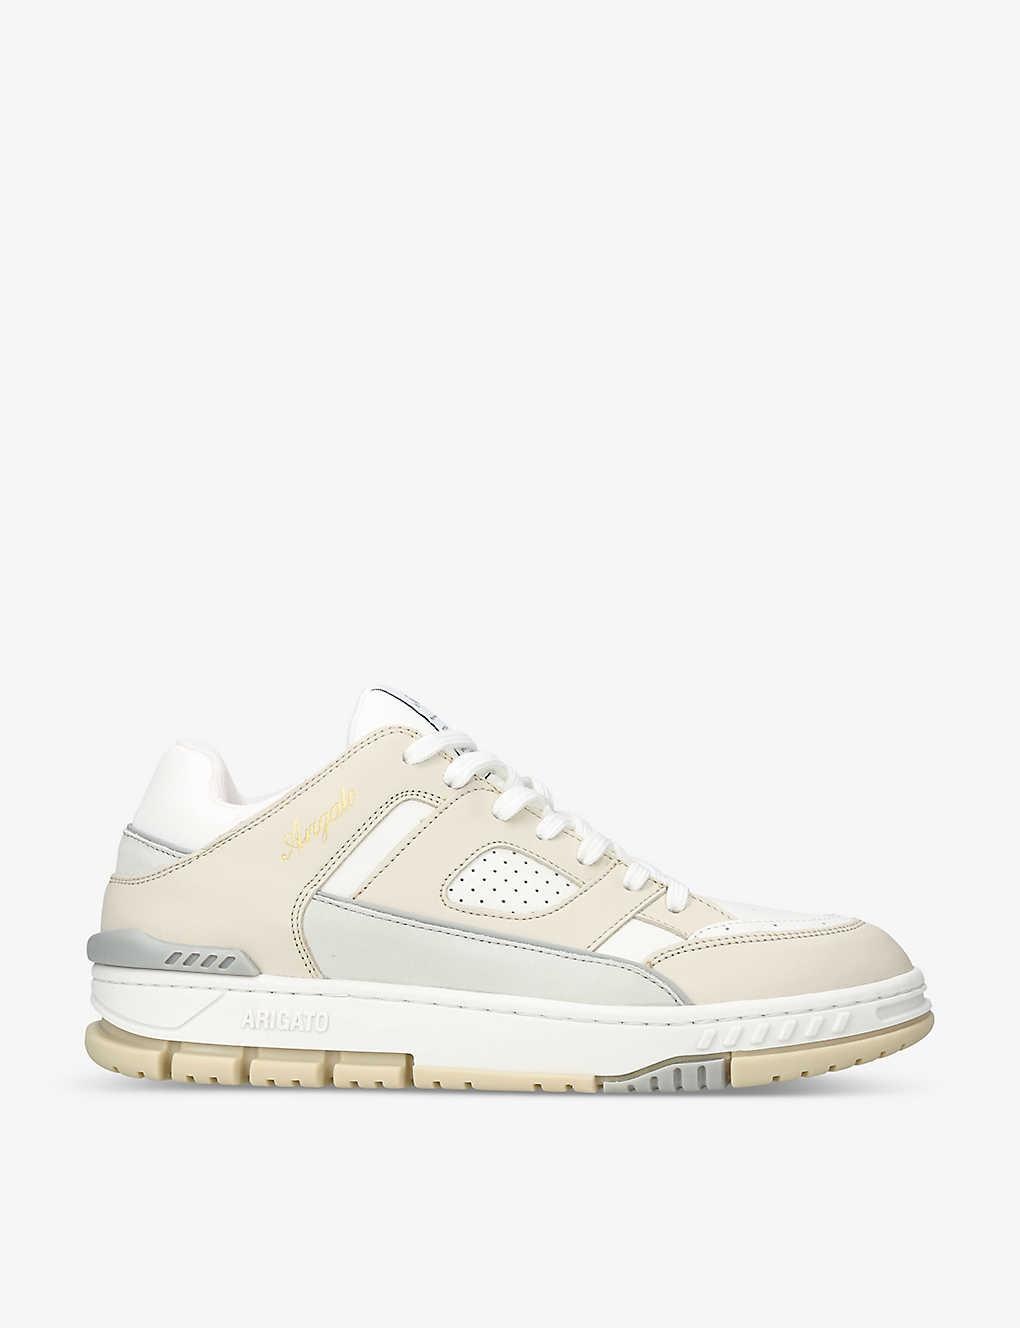 Axel Arigato Area Leather And Recycled Polyester Low-top Trainers In Cream Comb